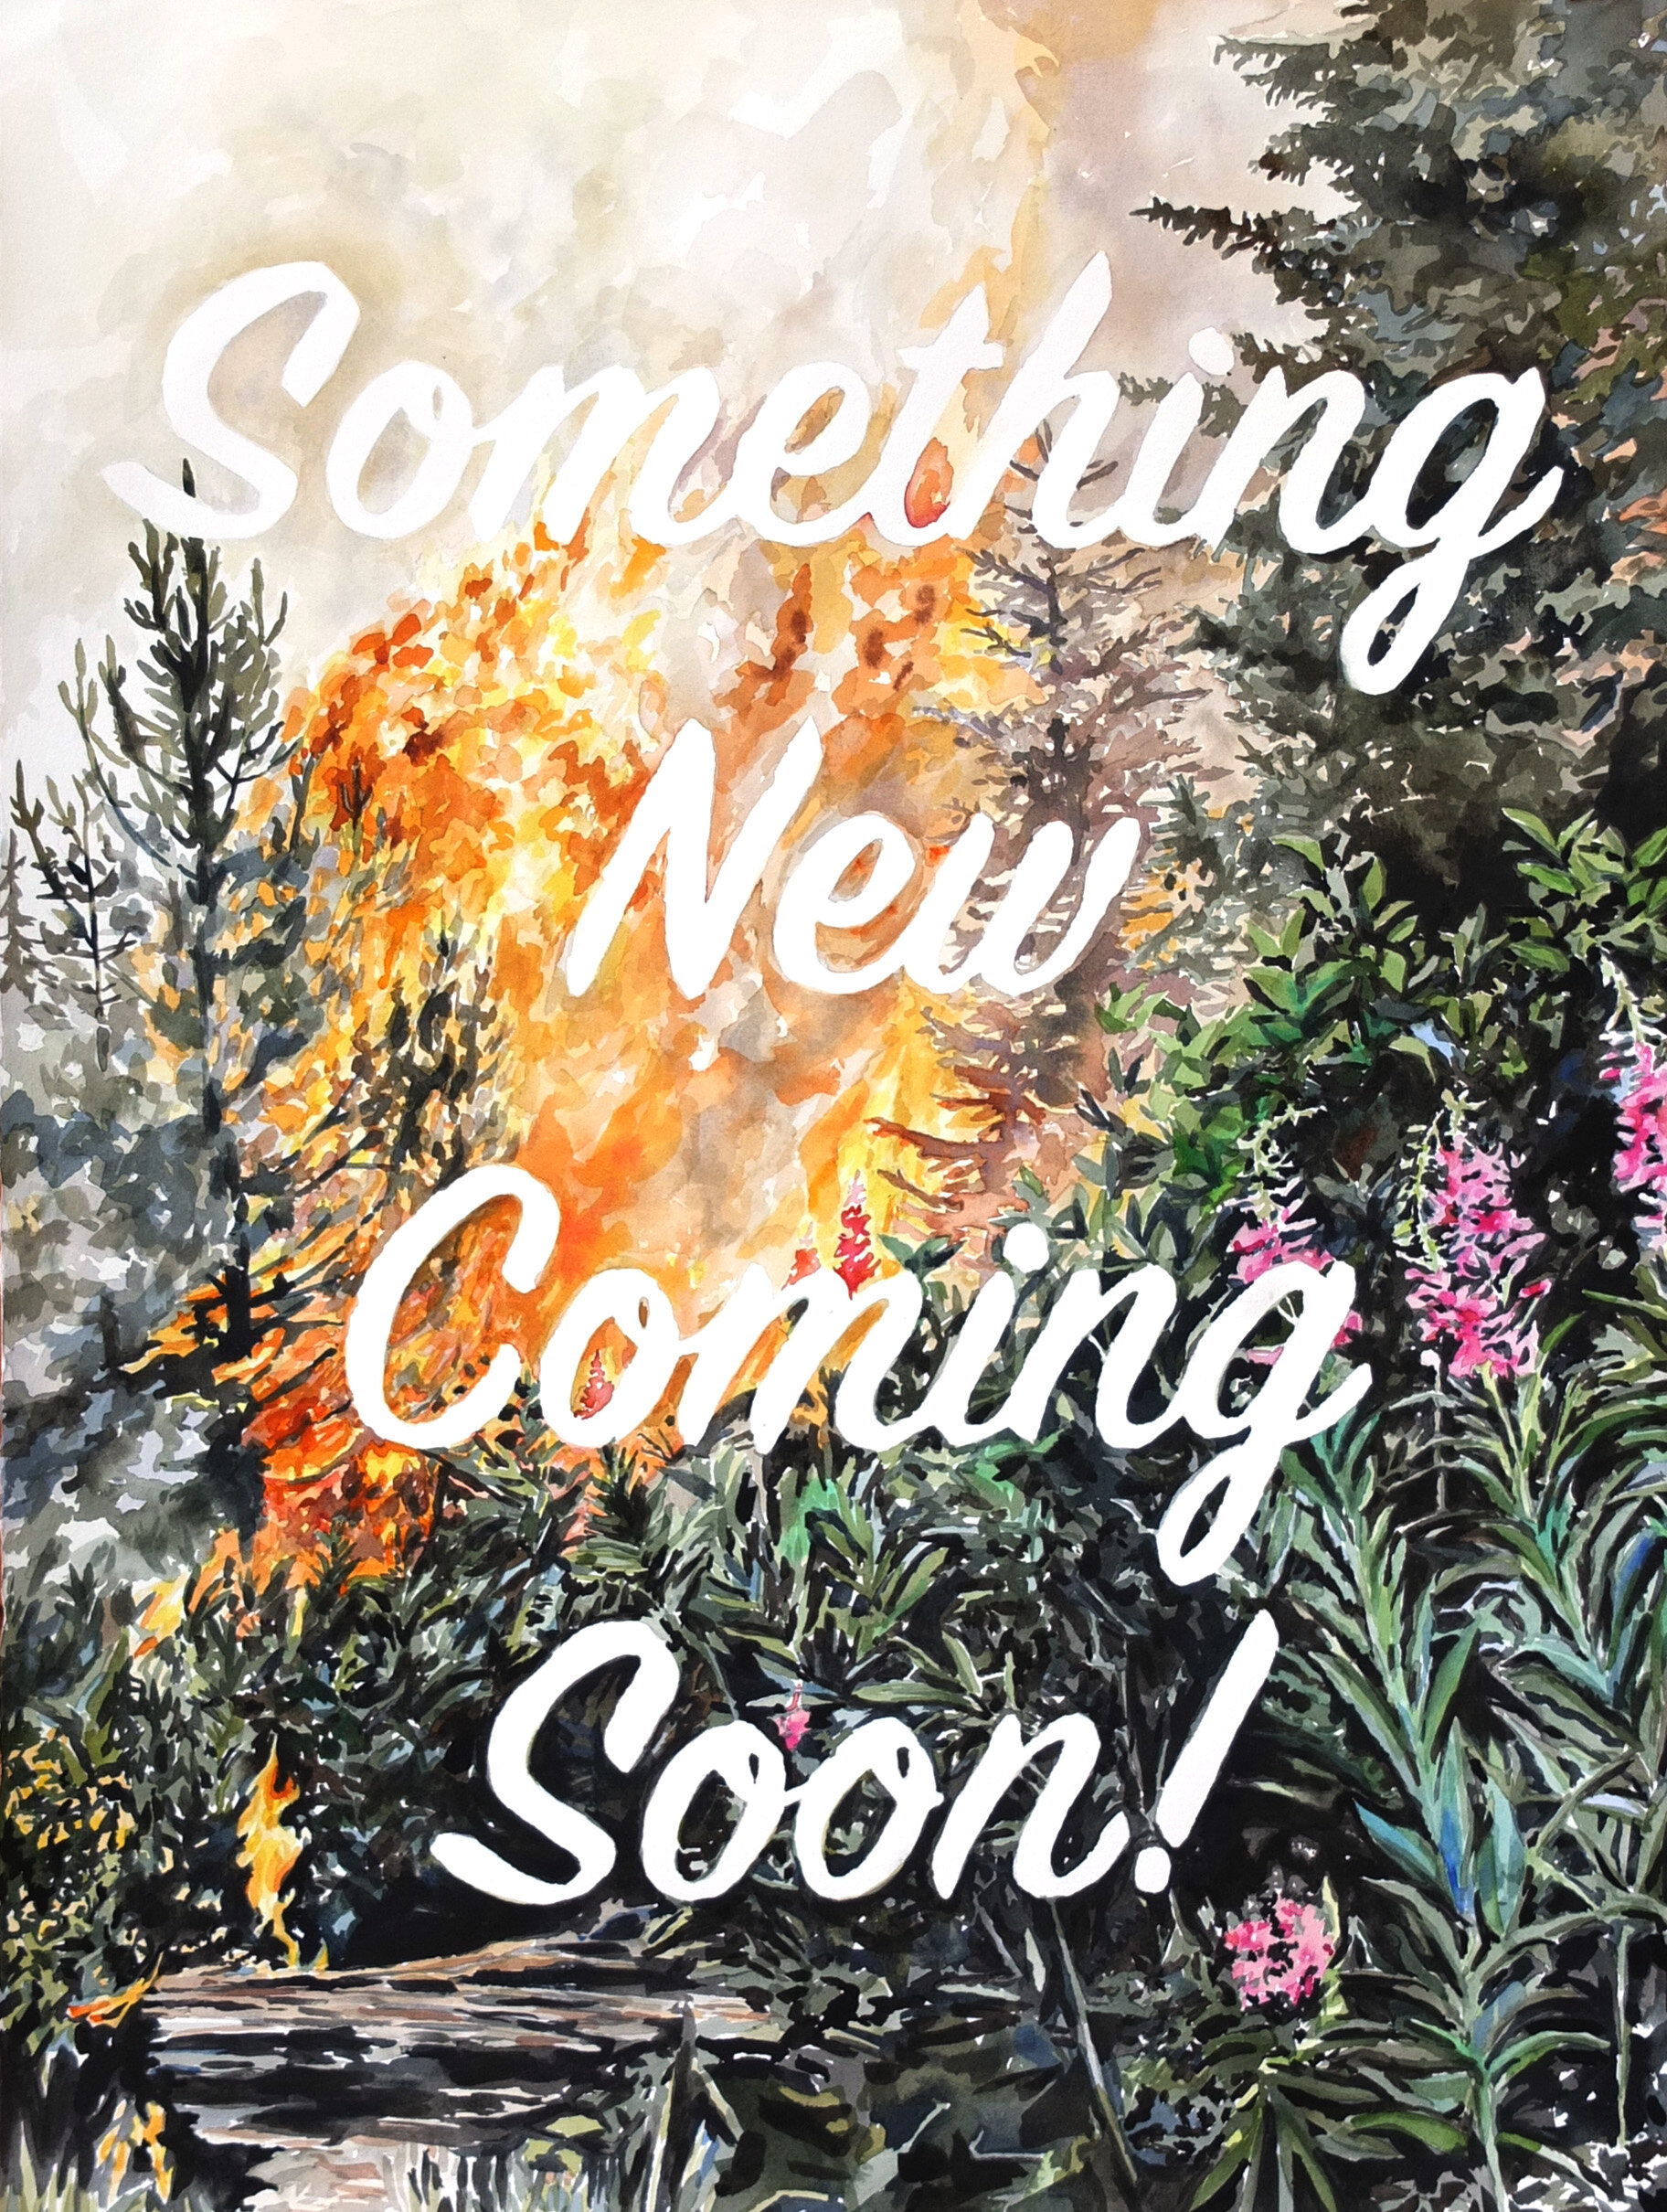 "Something New Coming Soon!"